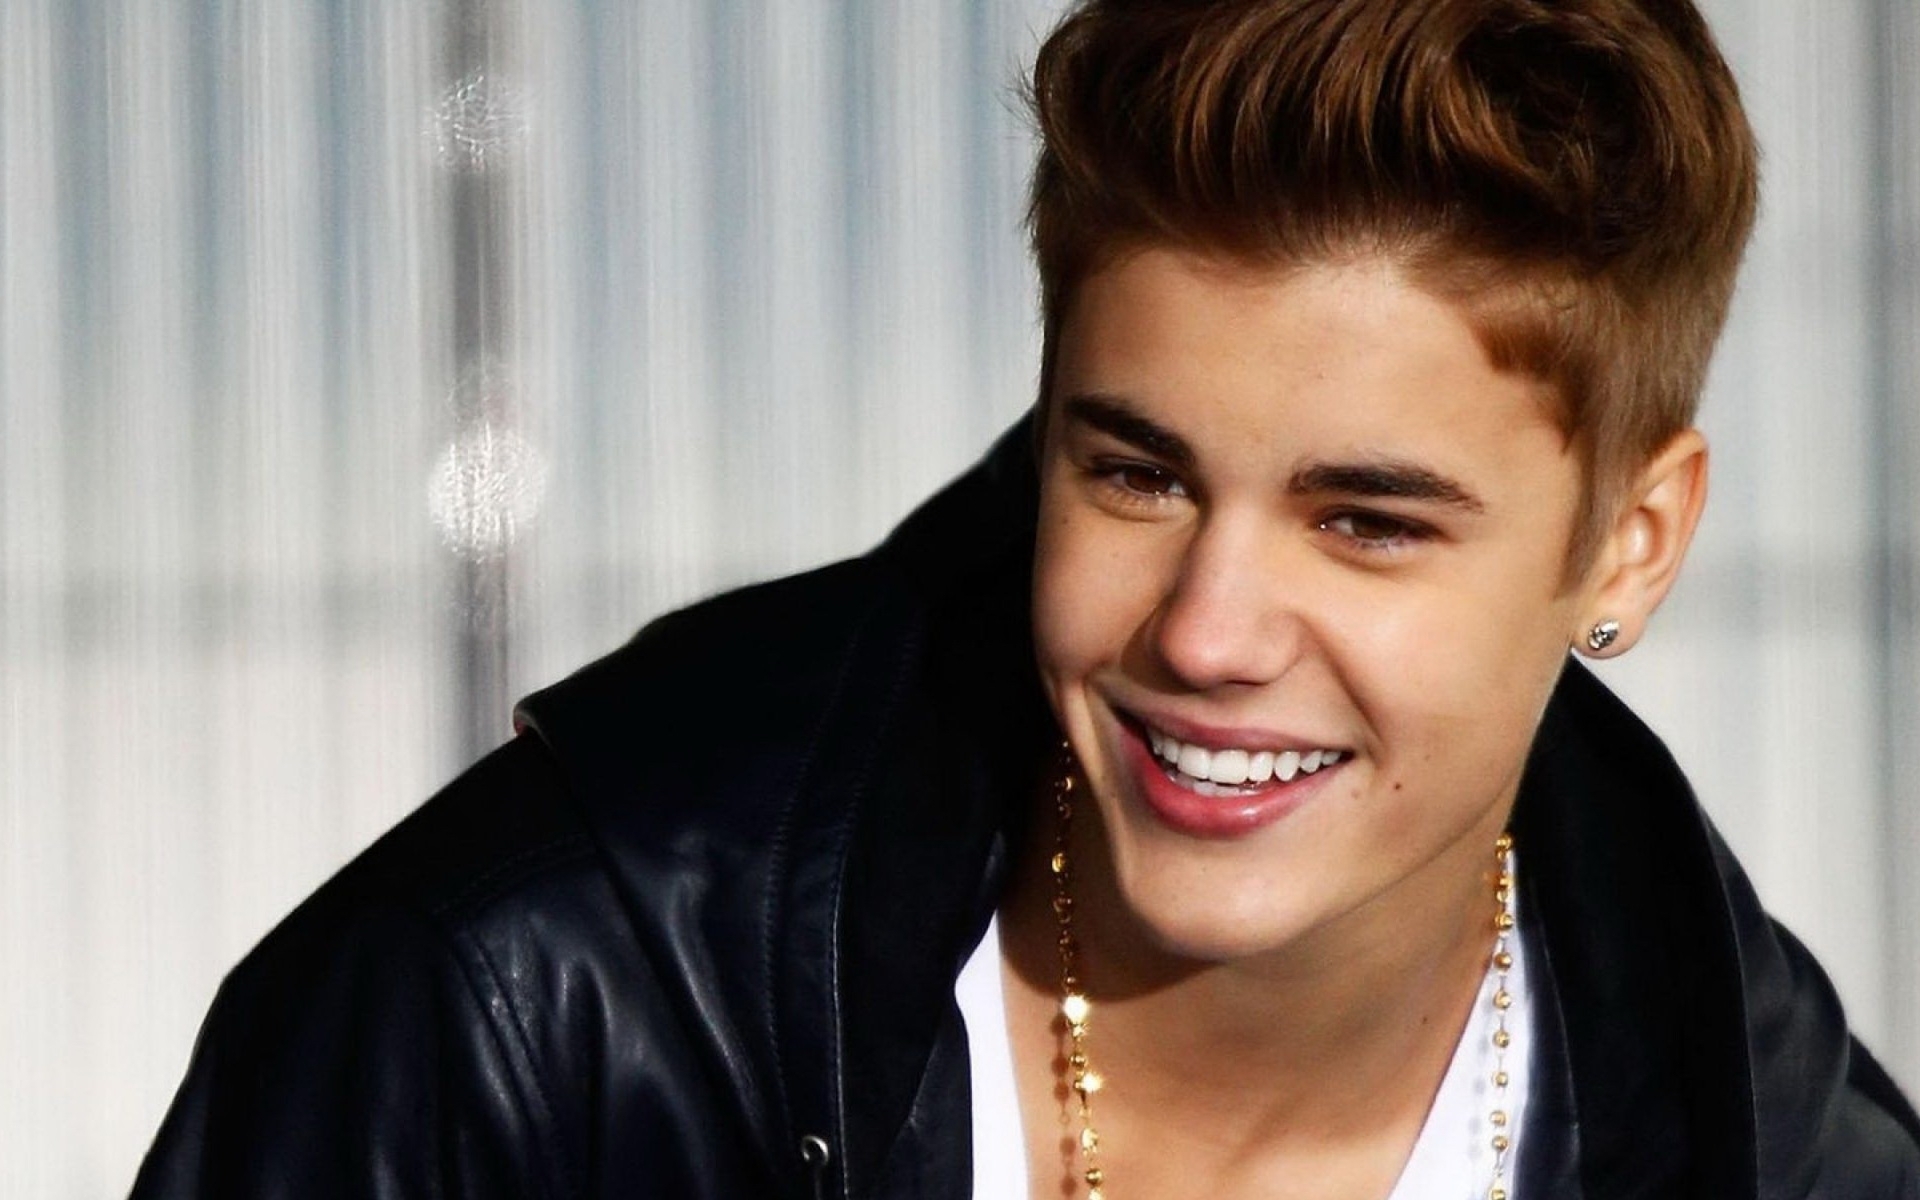 10 Best Cute Justin Bieber Pictures FULL HD 1080p For PC Background 2021